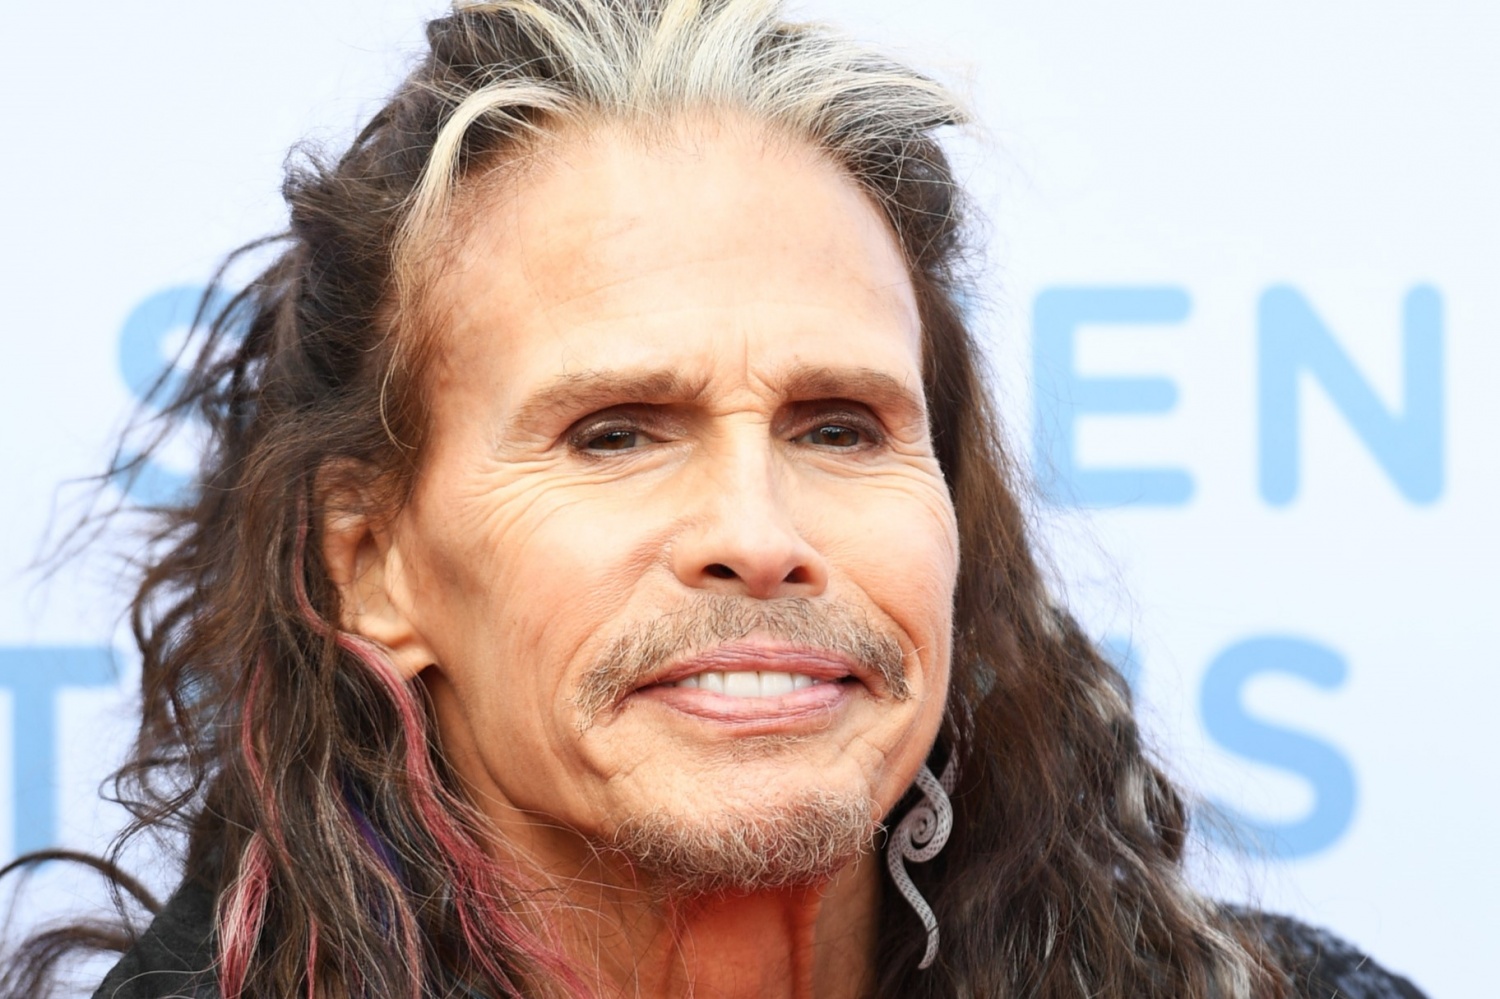 Aerosmith cancels final shows of the year, citing Steven Tyler’s health